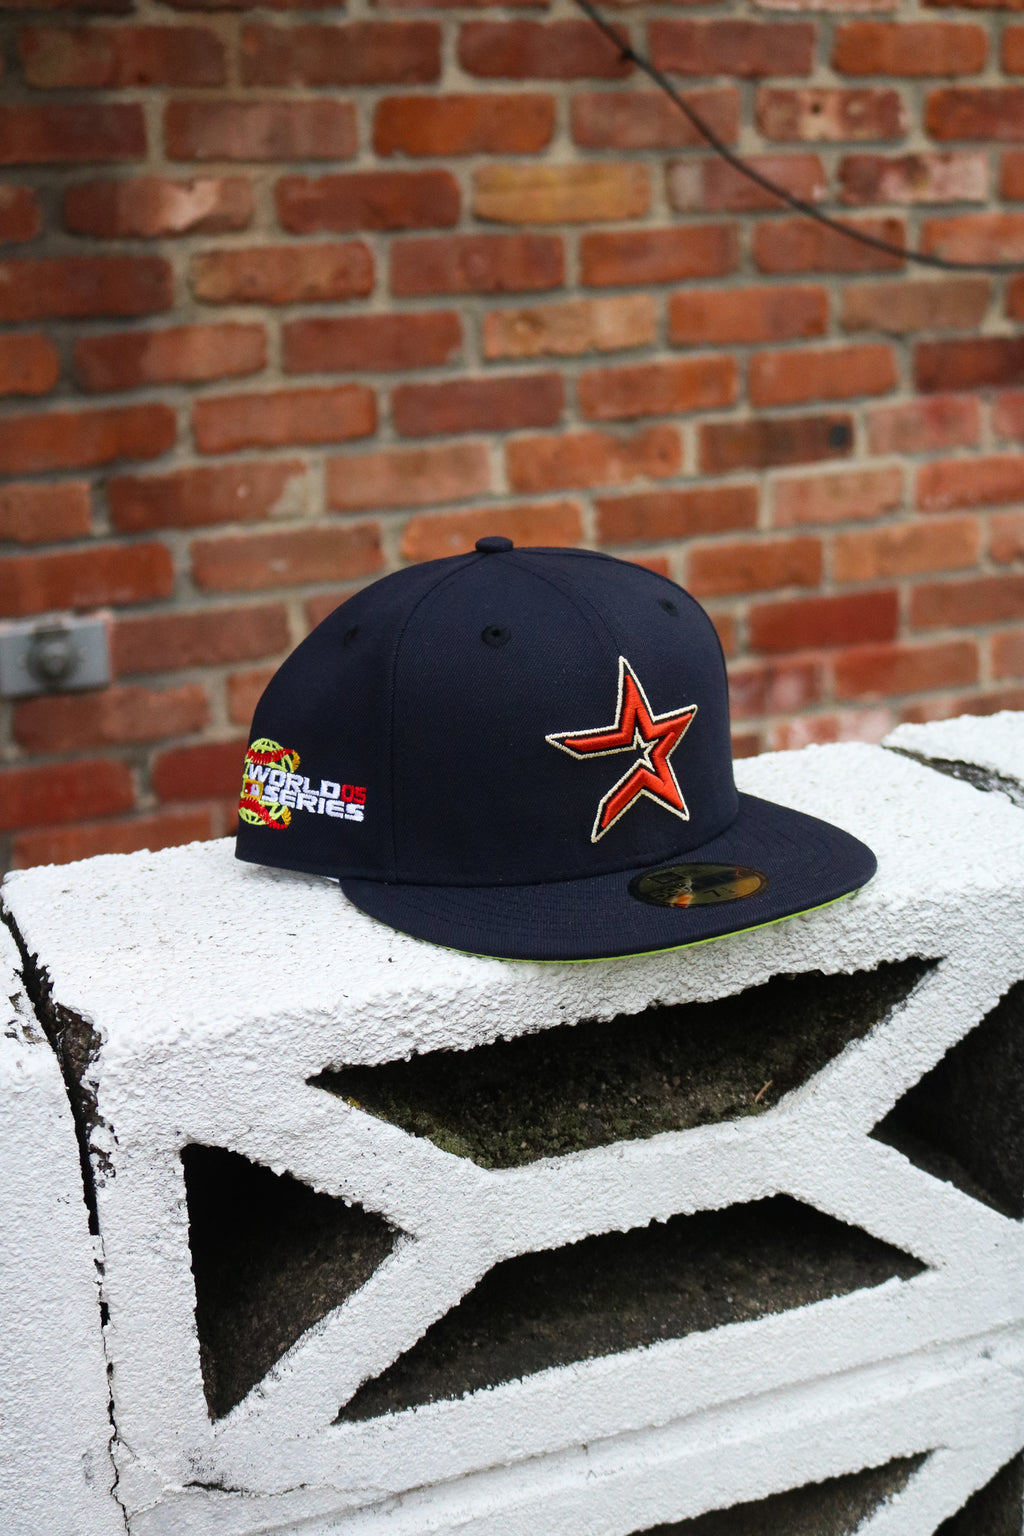 2005 Houston Astros Cap - Fresh Fitted Friday